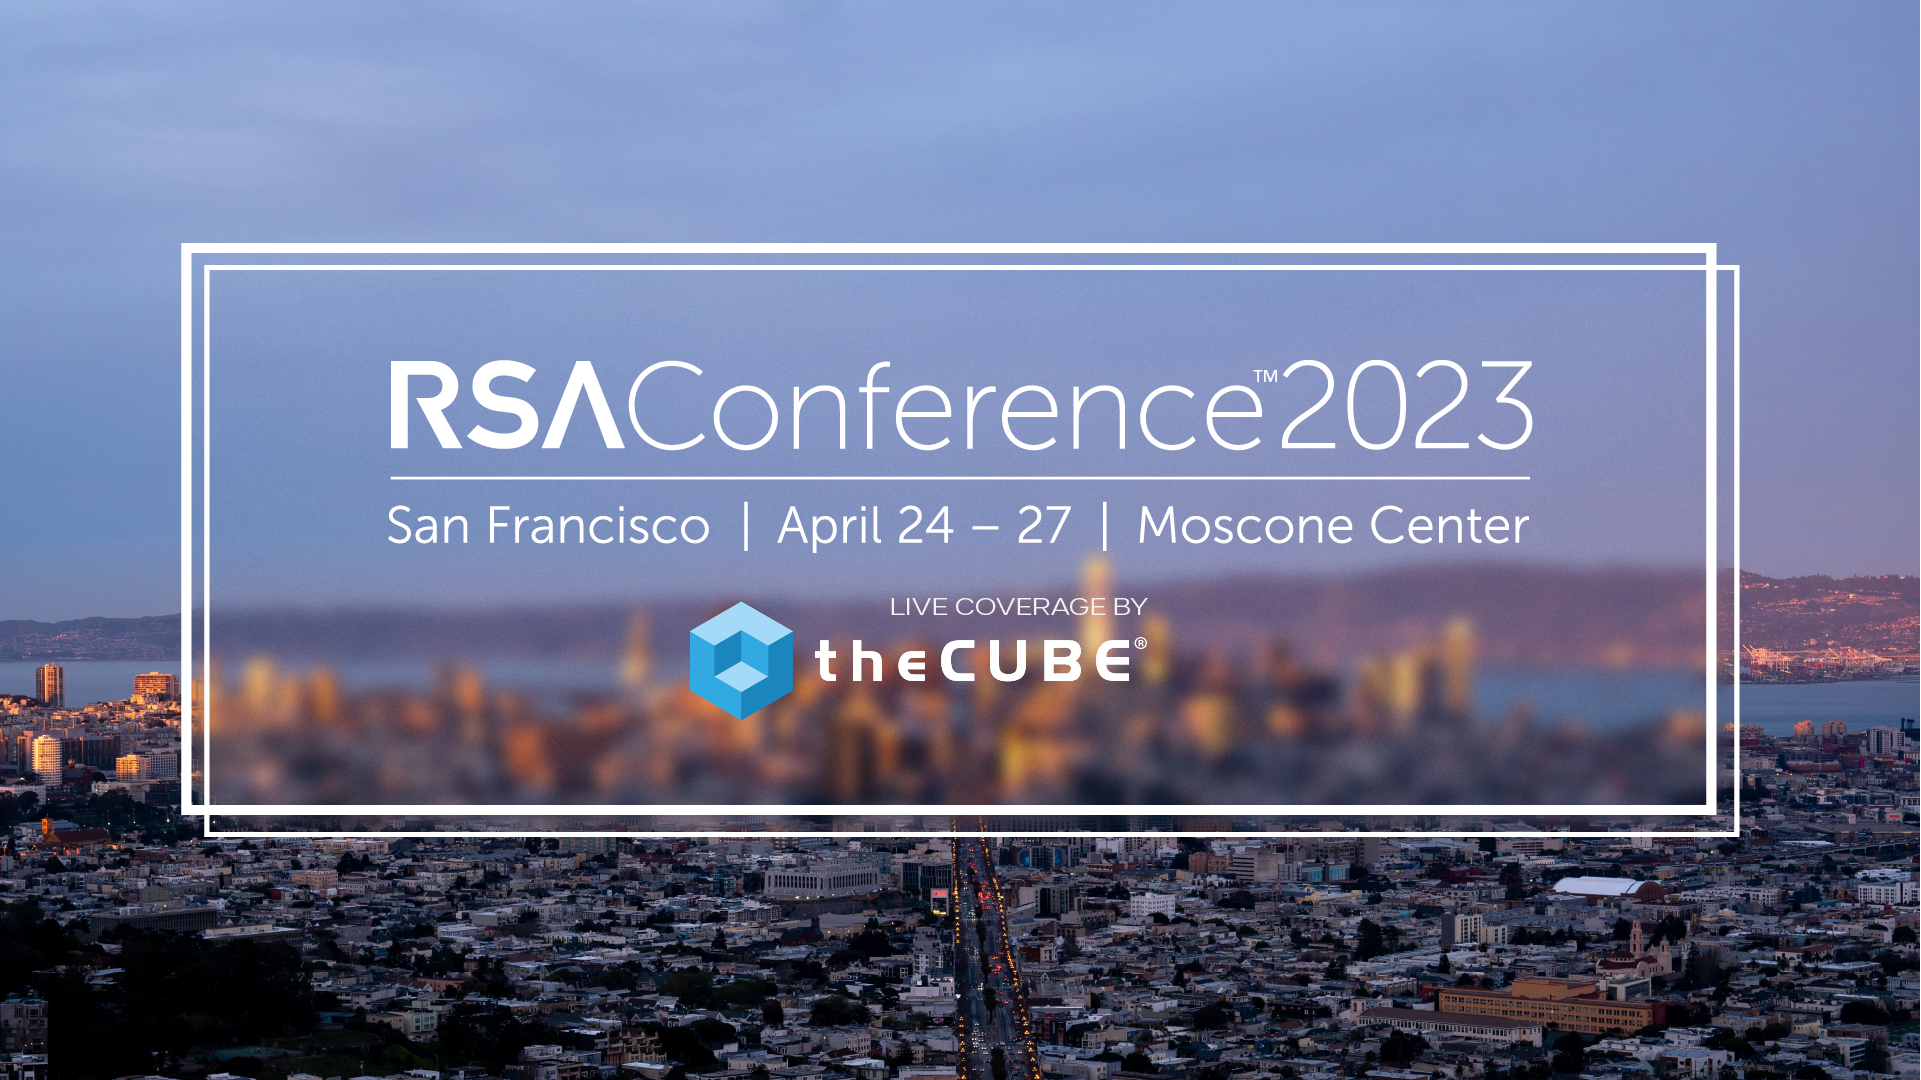 What to expect during the RSA Conference: Join theCUBE April 24-27 - SiliconANGLE